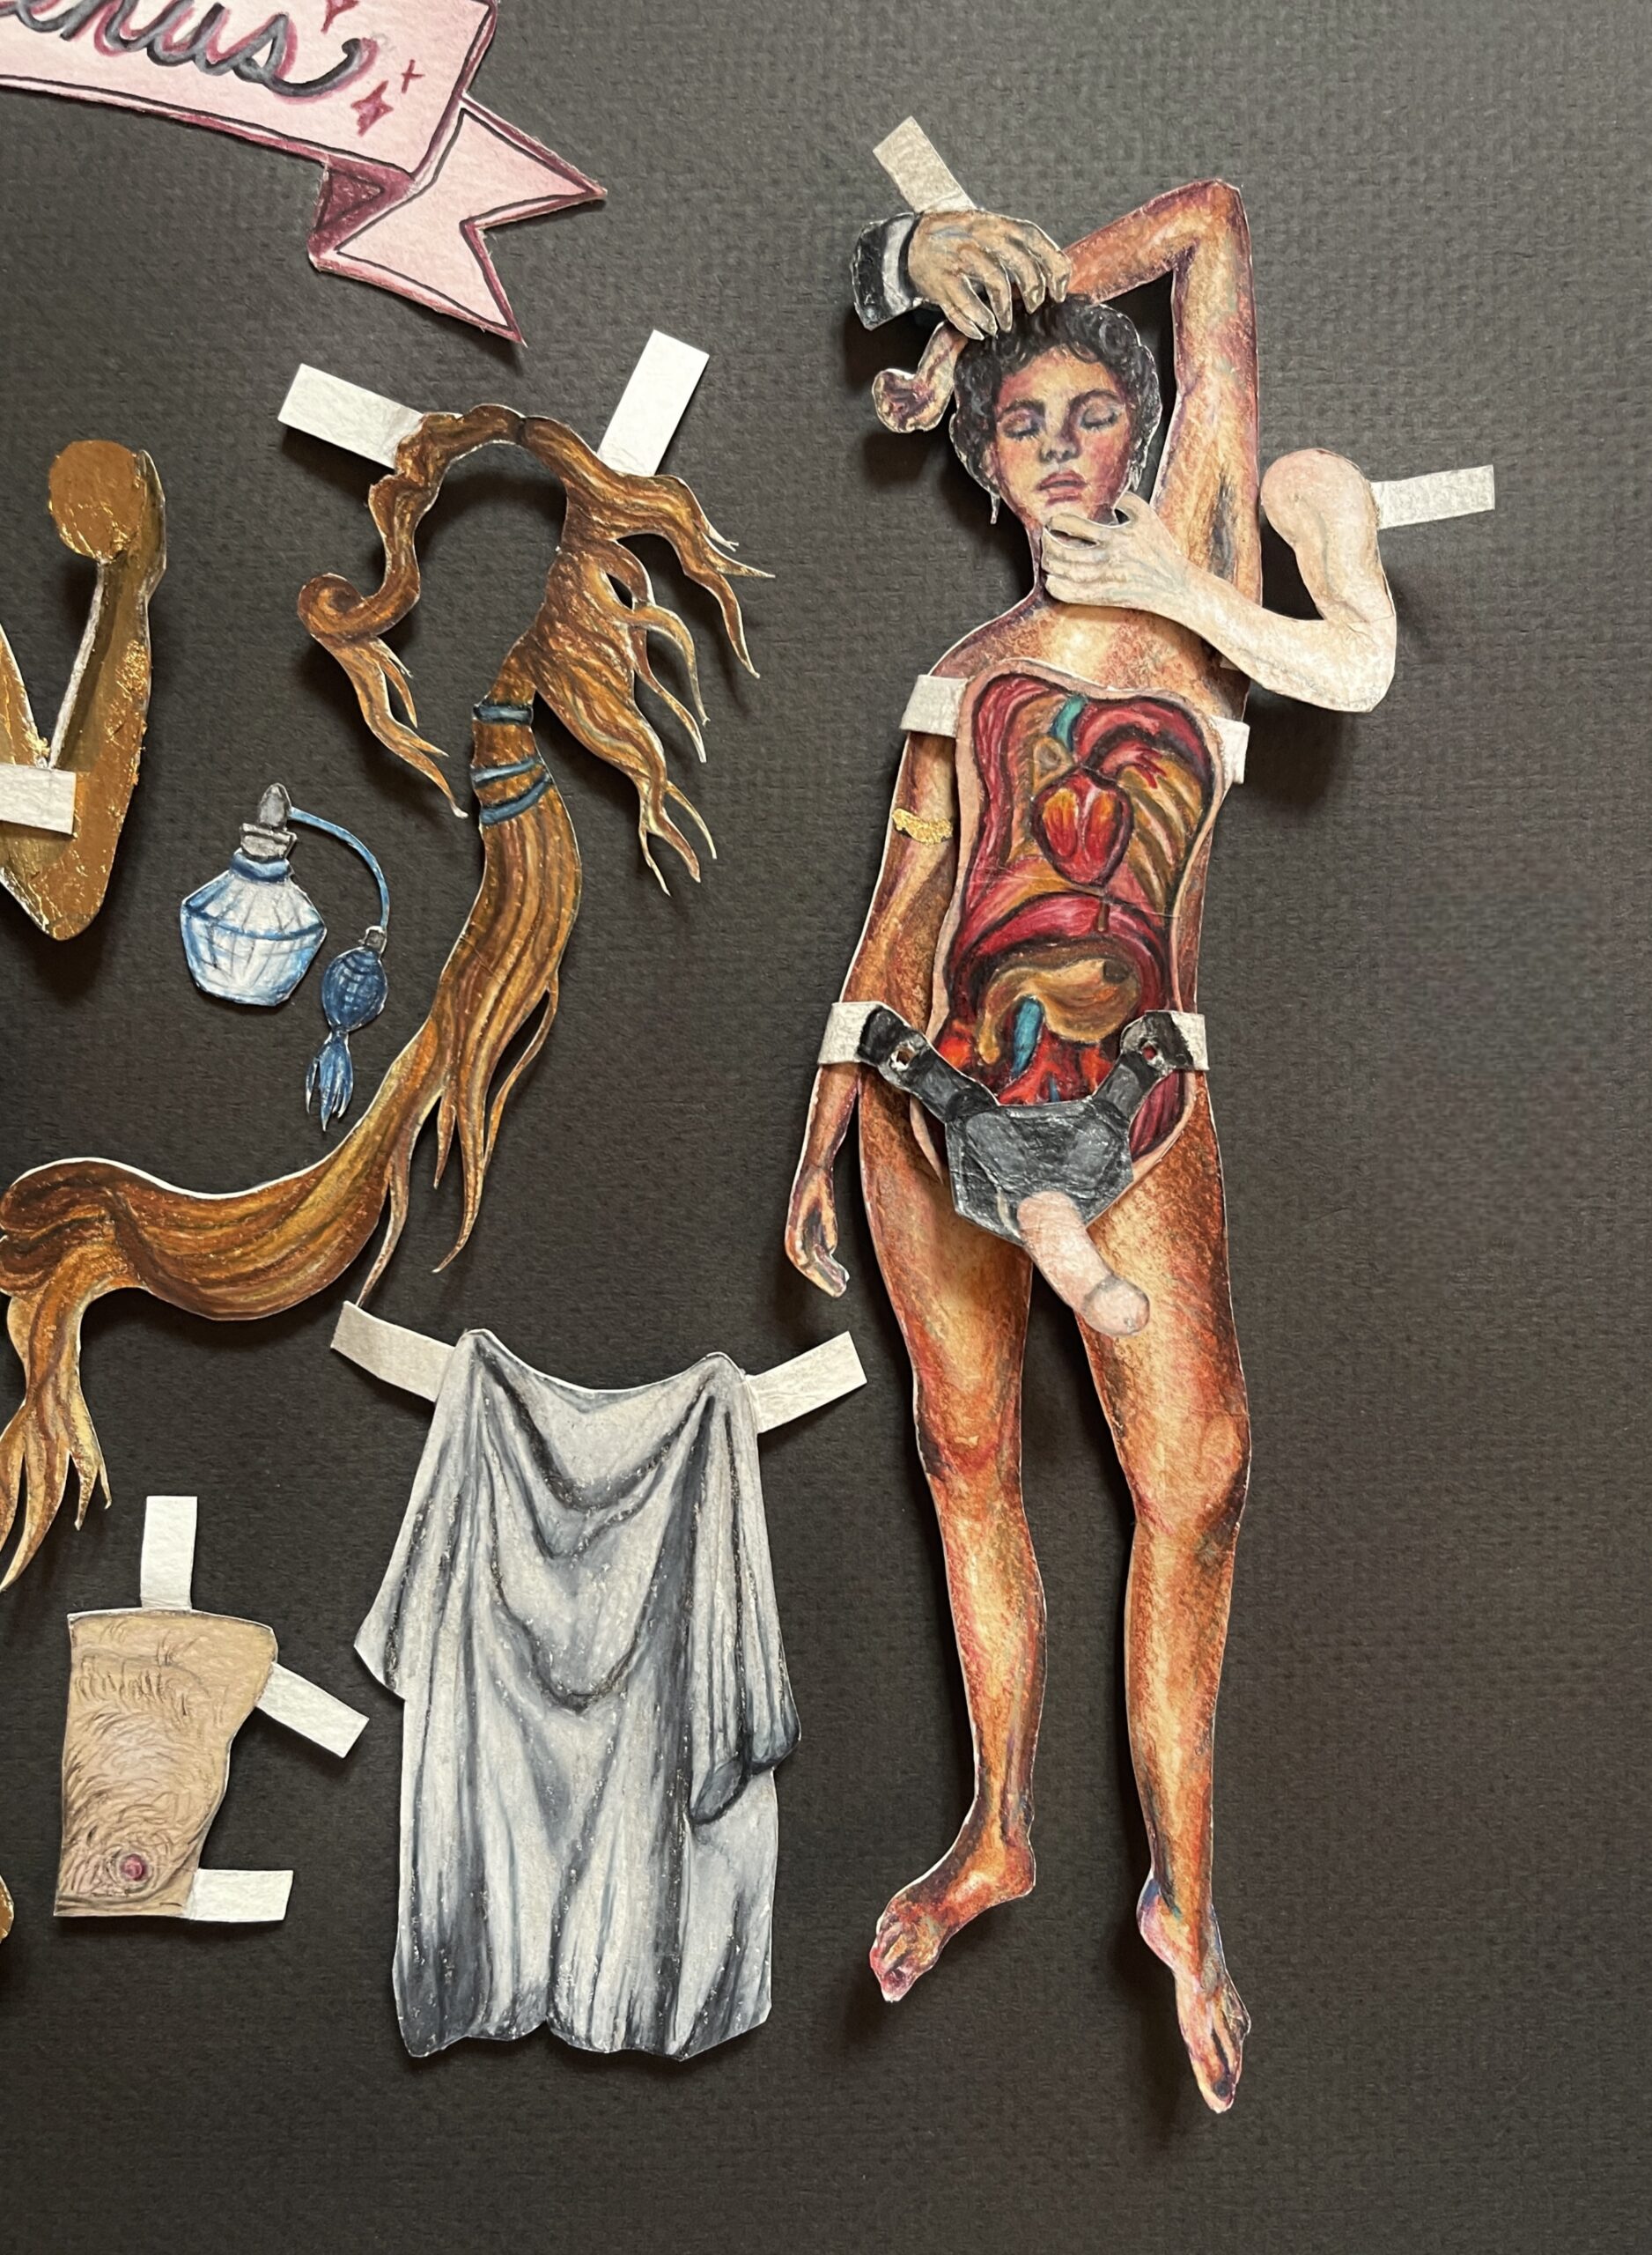 Image shows a detailed shot of the art work in which a drawing of a human's internal organs and strap on penis have been imposed on top of a drawing of a posed female figure.